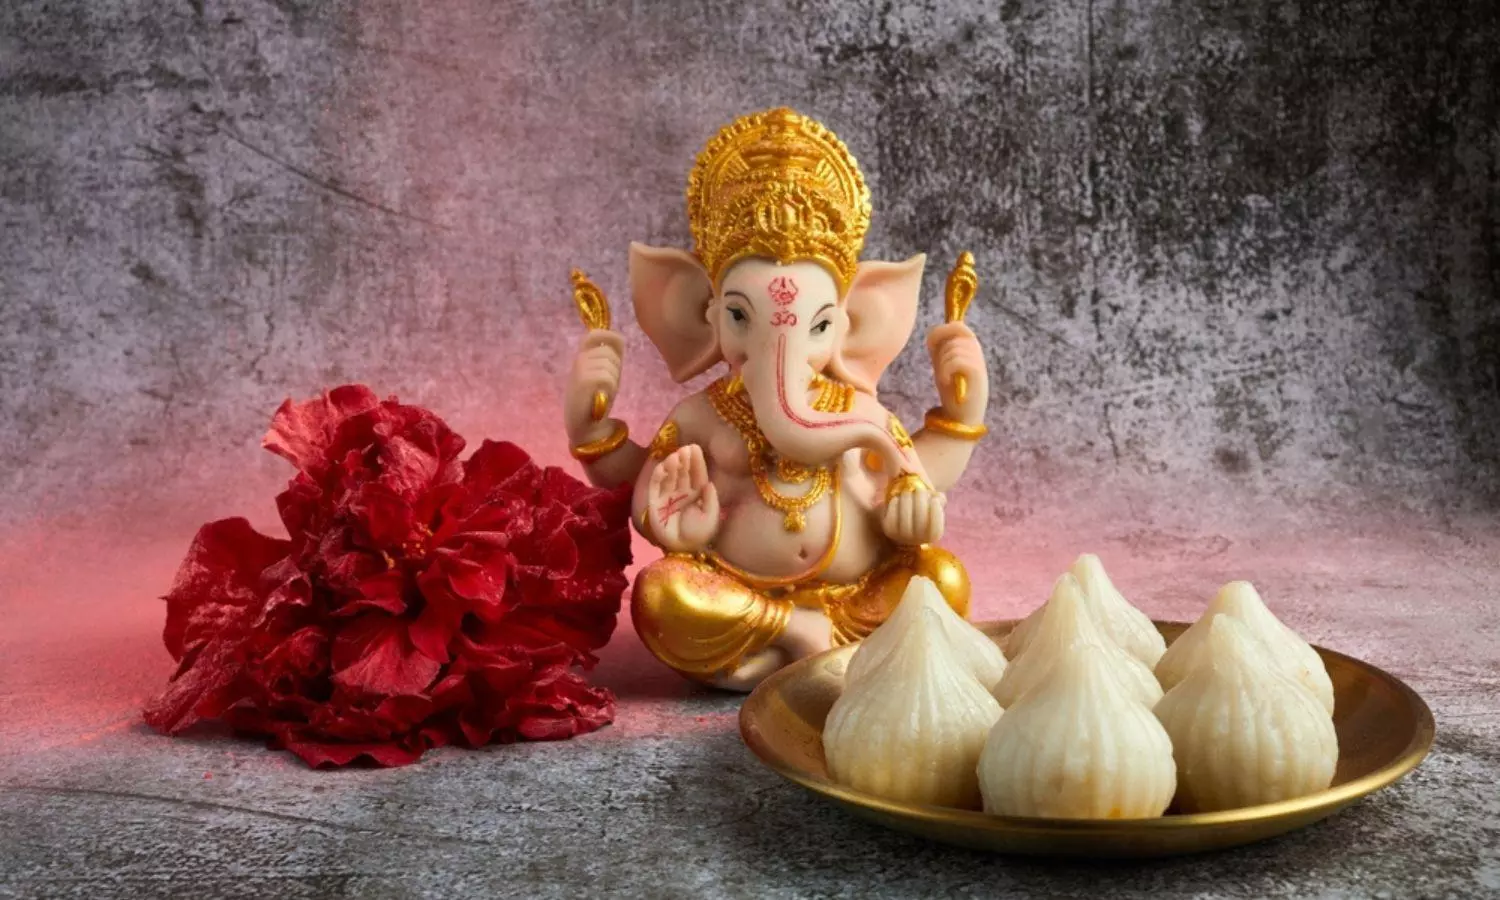 Explore and savour Mumbais delectable street food as we welcome Bappa to the city